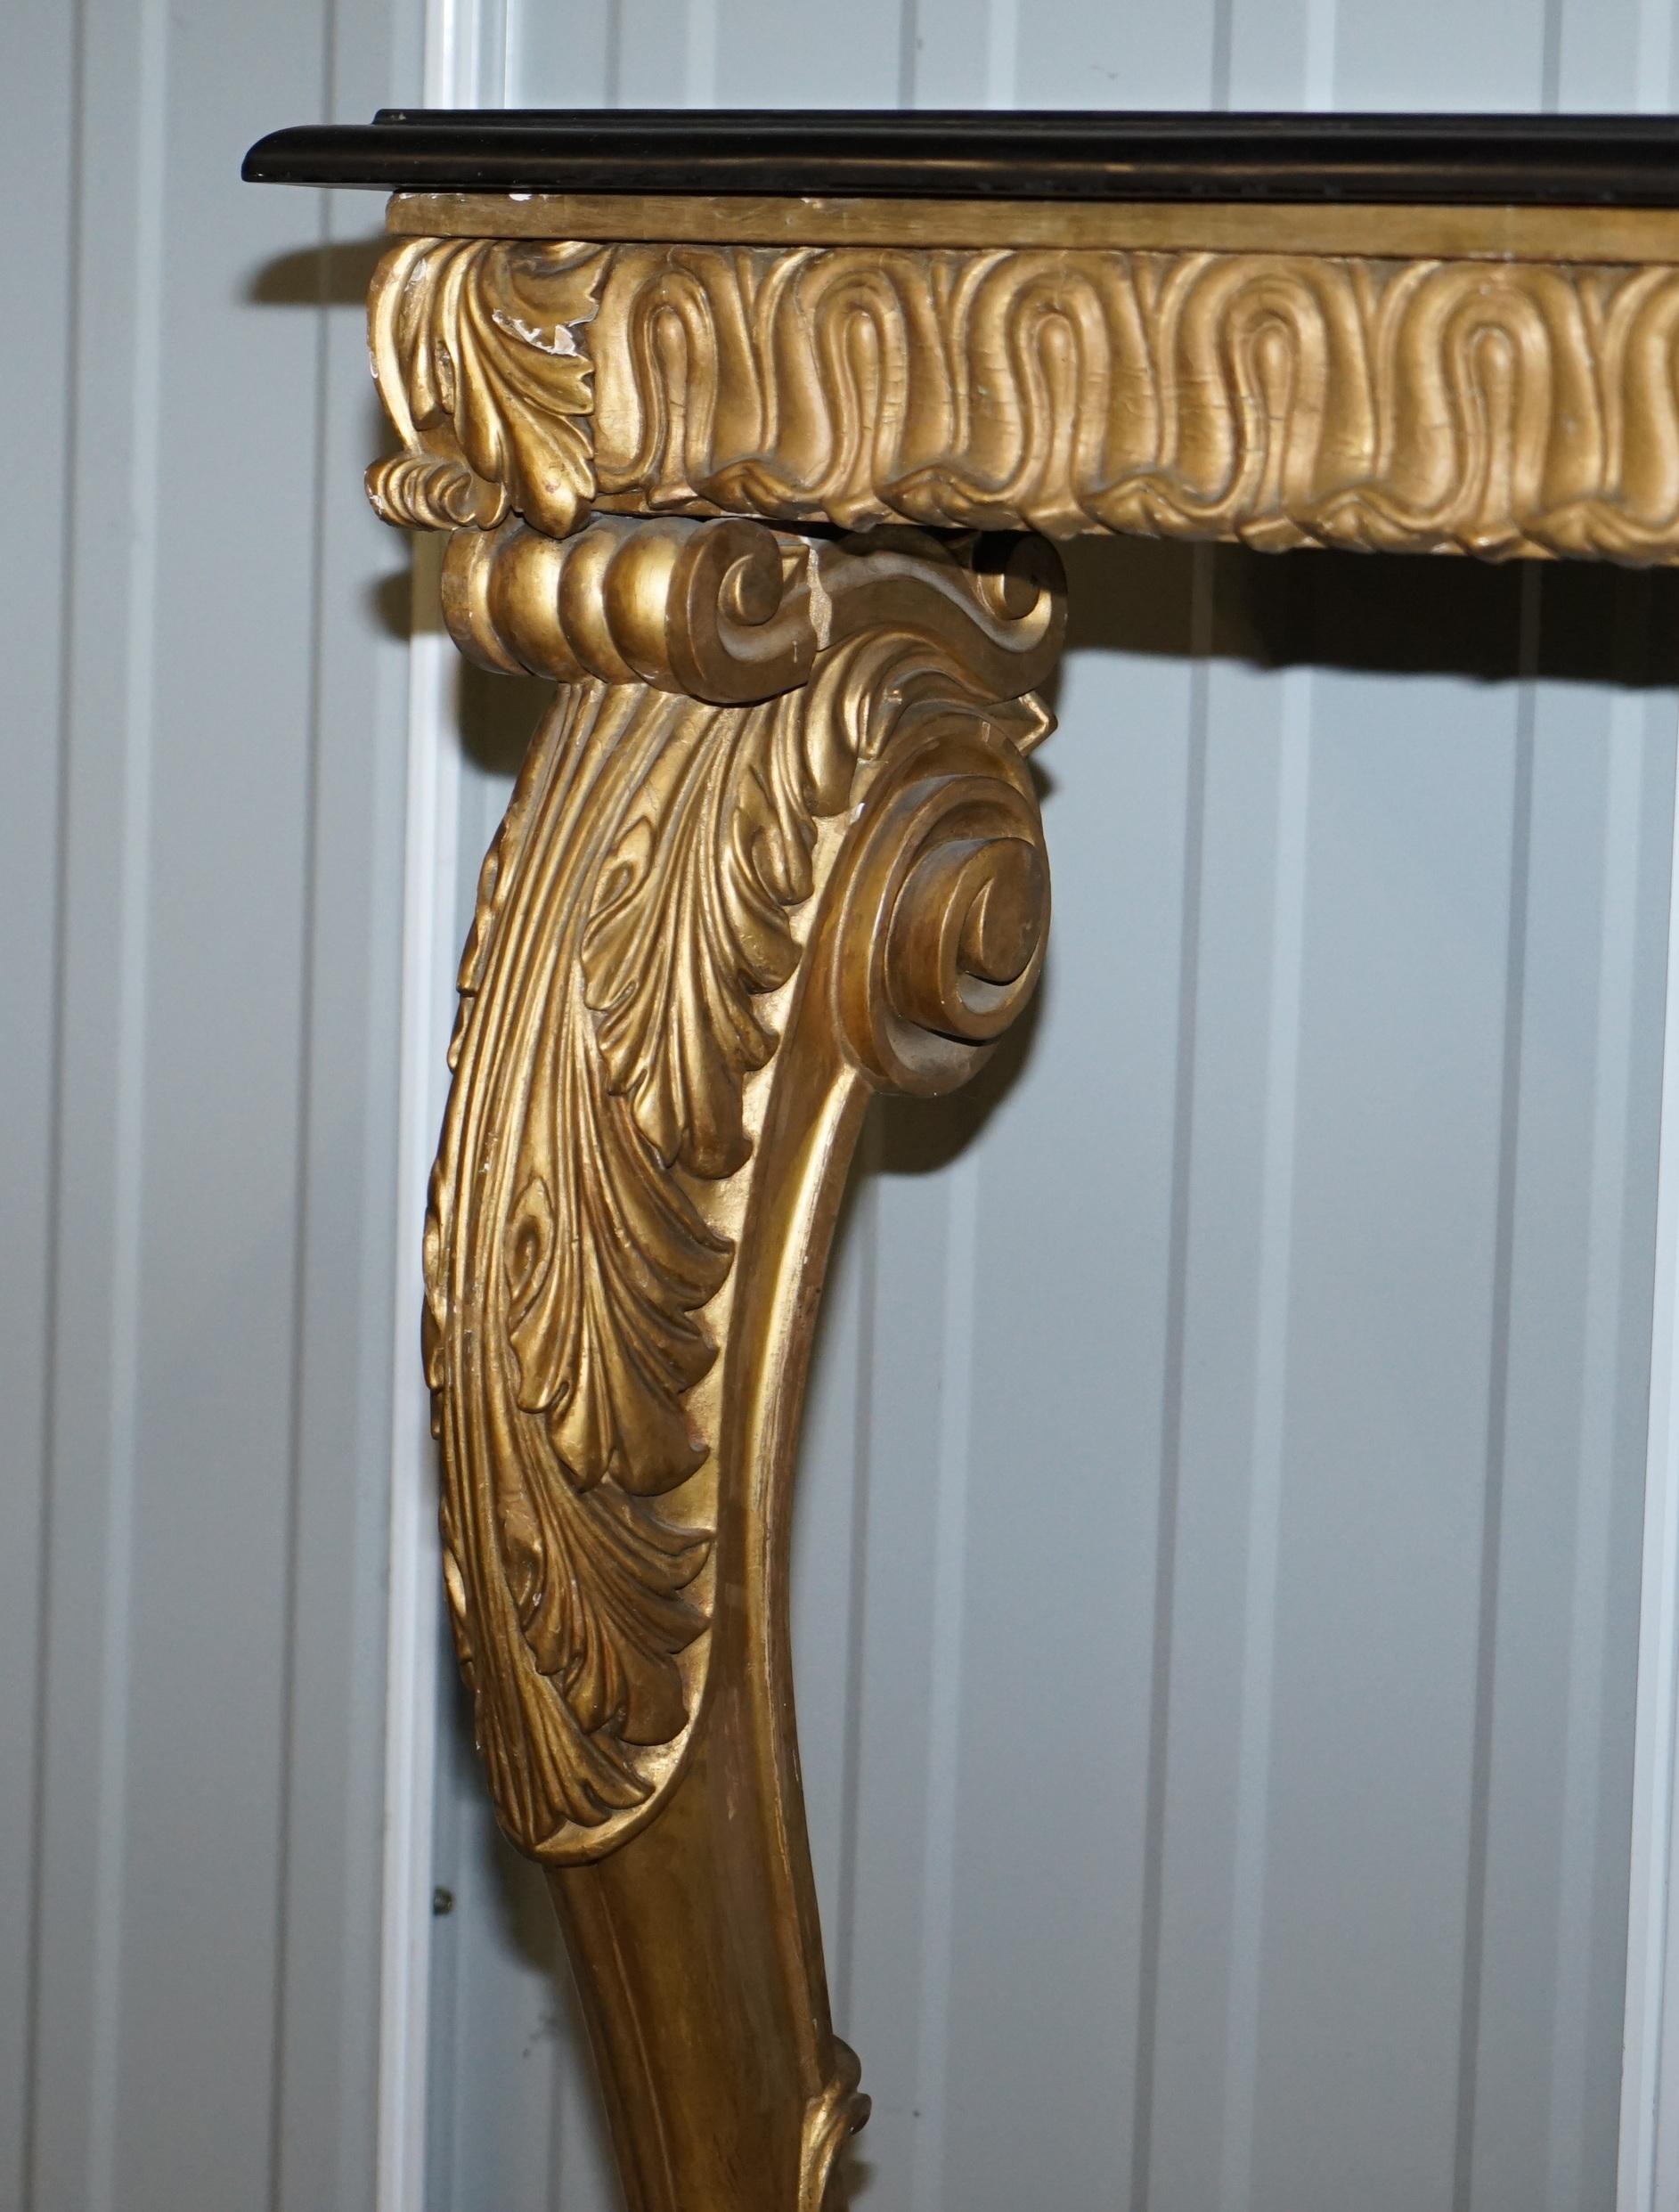 Hand-Crafted Rare Antique French Hand Carved Giltwood & Marble Console Table circa 1860 Paris For Sale